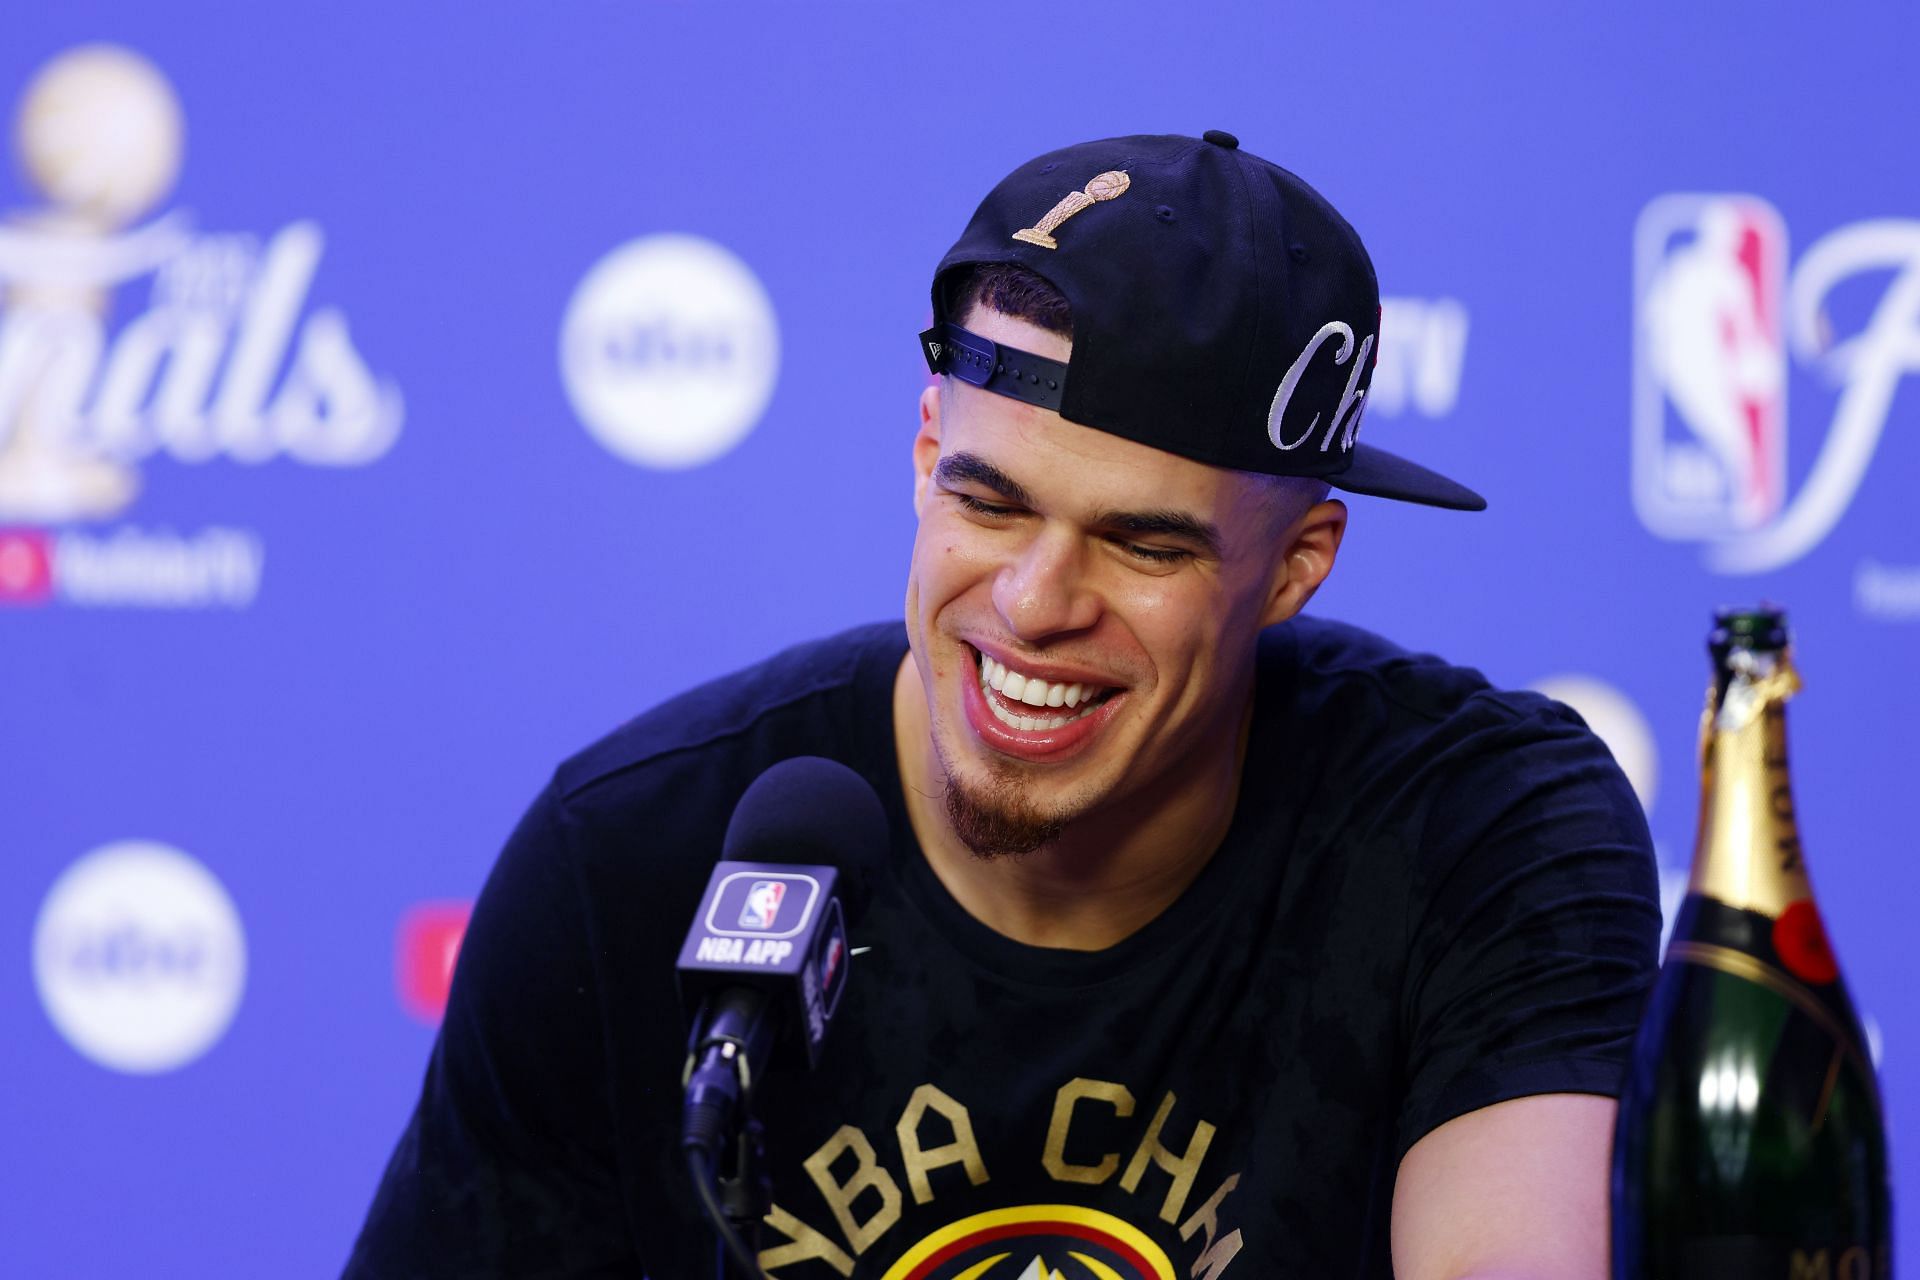 After hard-earned NBA journey, Michael Porter Jr. unfazed by Finals shooting  woes